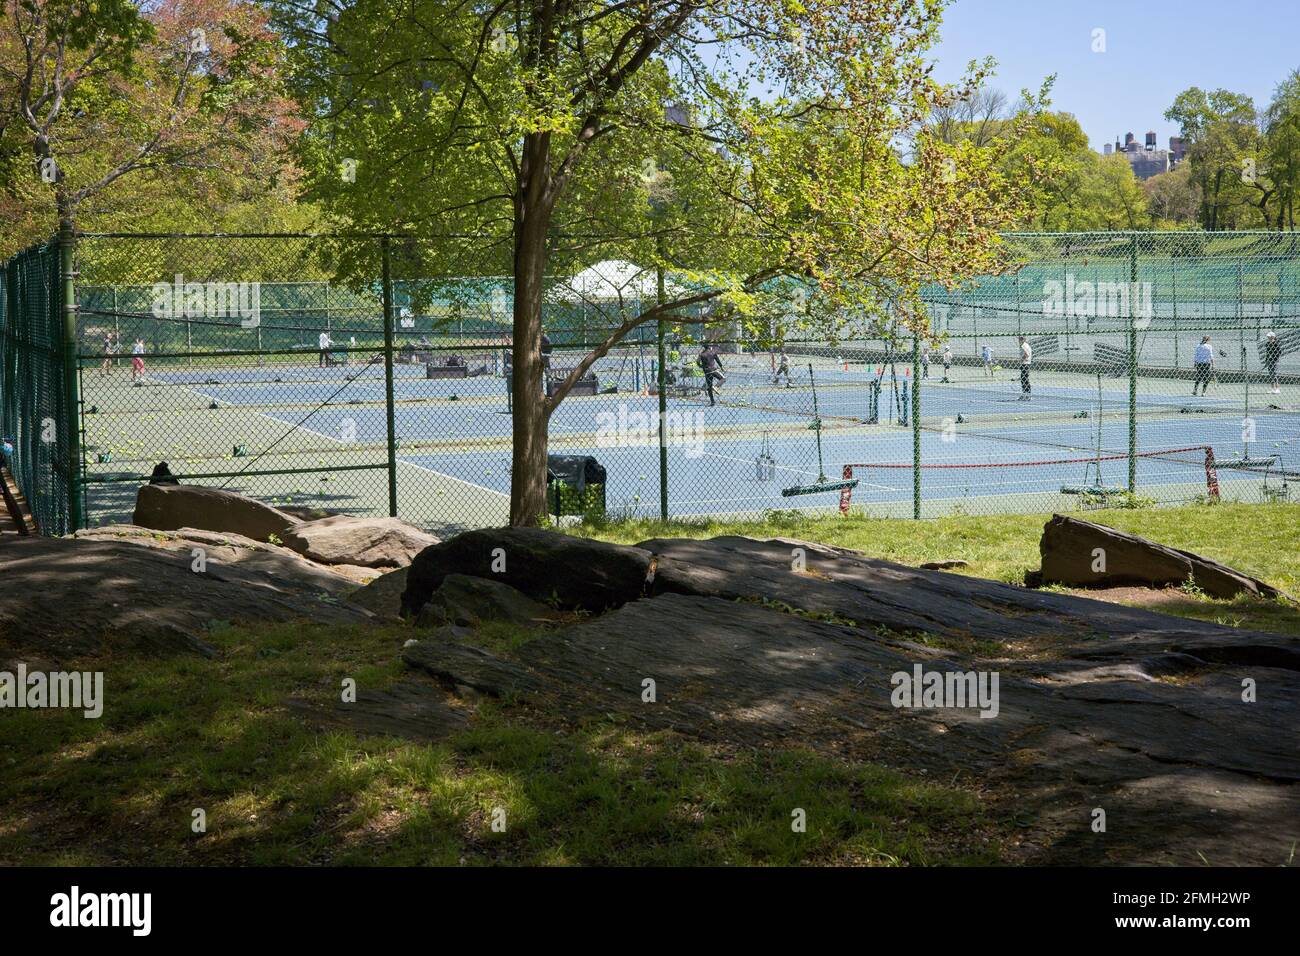 New York, NY, USA - May 9, 2021: Tennis Courts in Central Park near 96th Street on a sunny day in spring Stock Photo